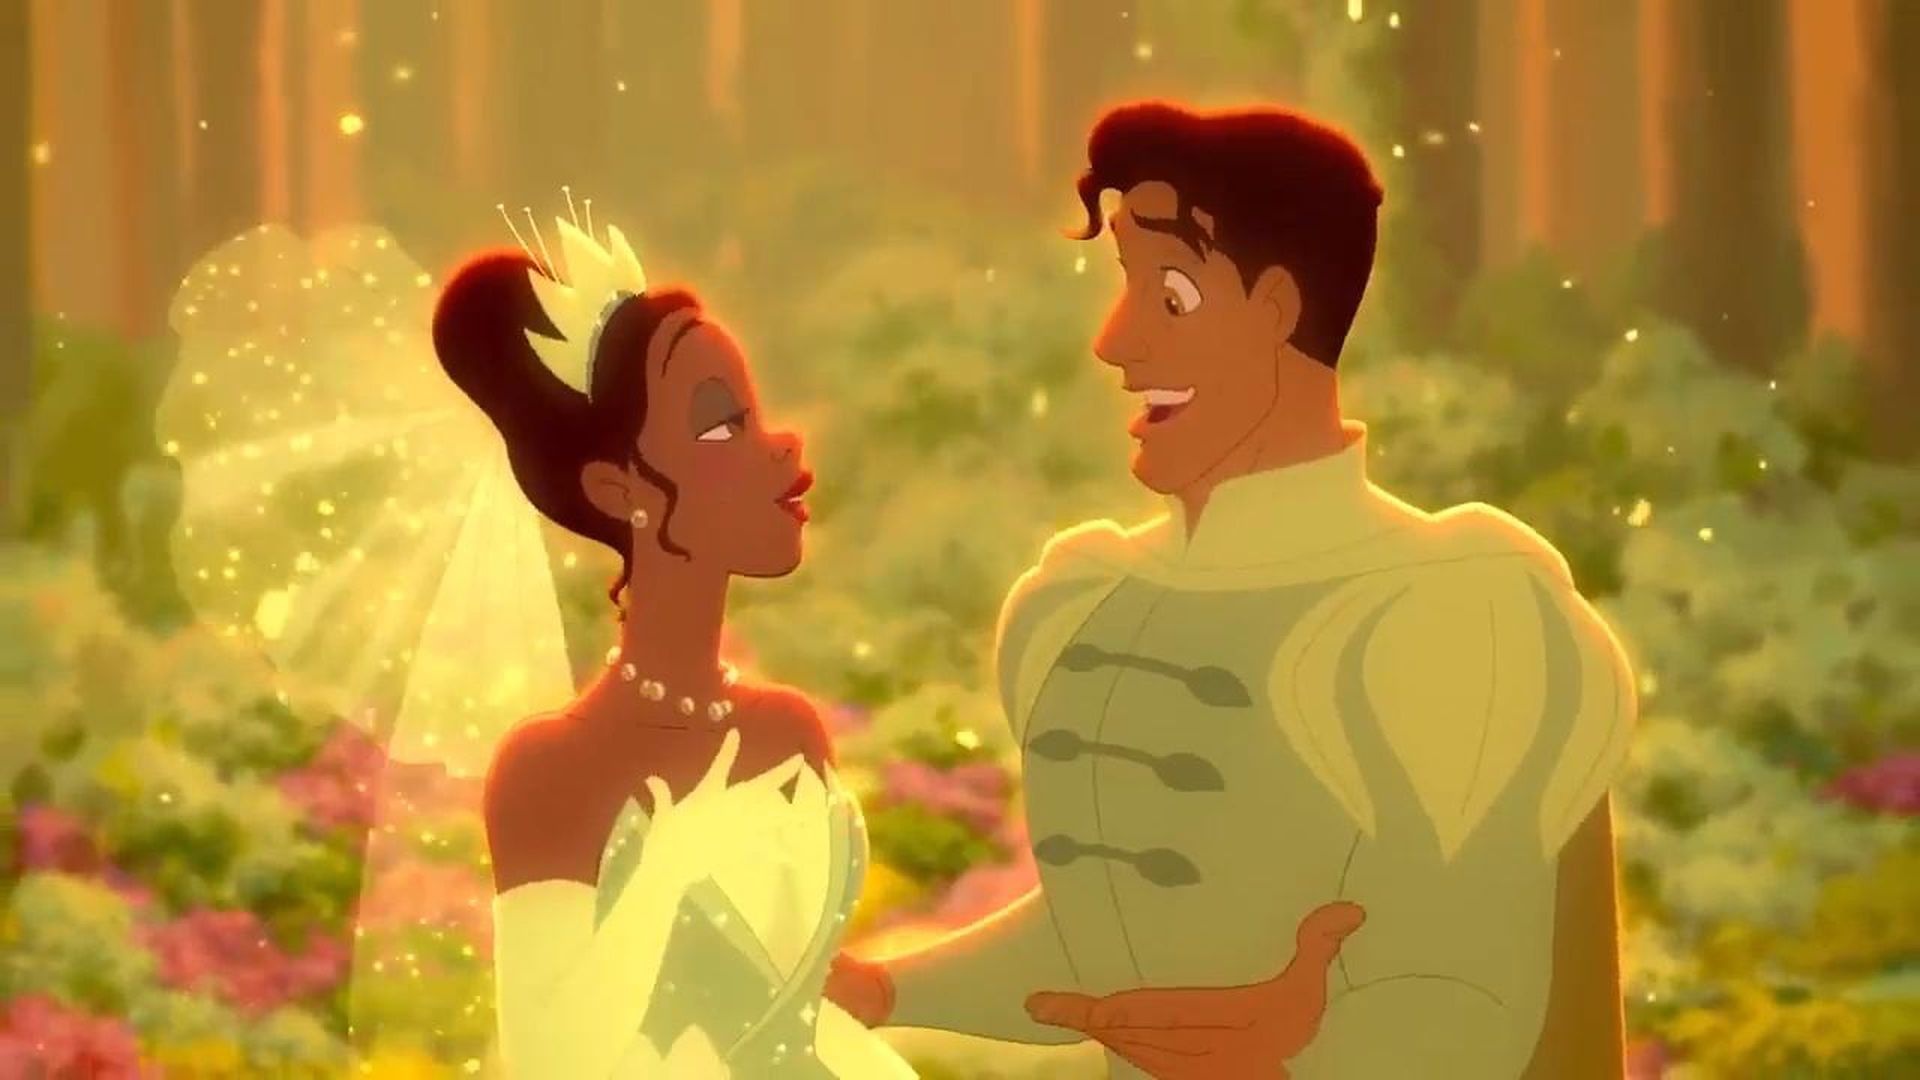 Tiana, Disney relationships, Love prediction, The Princess and the Frog, 1920x1080 Full HD Desktop